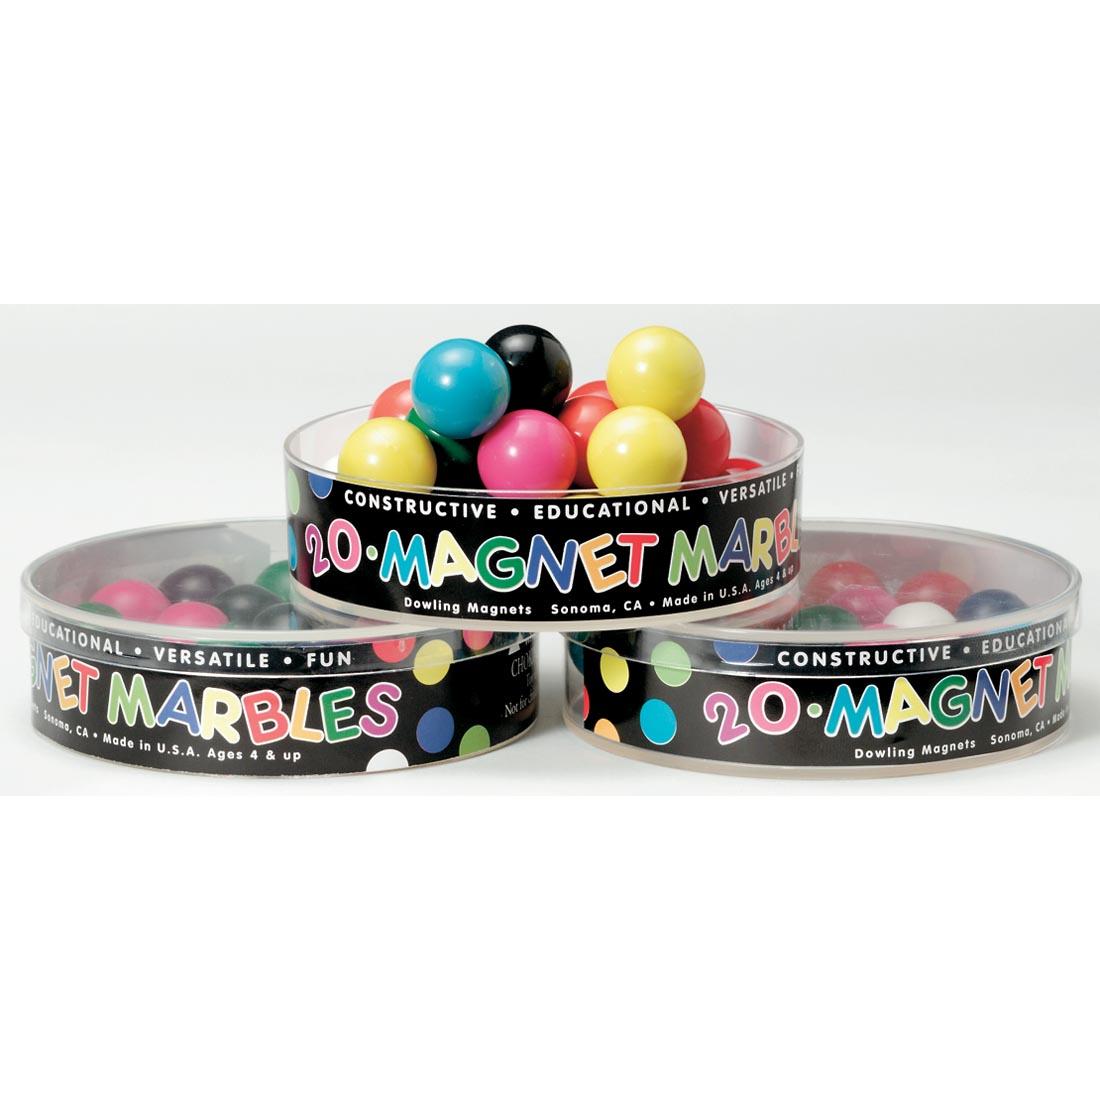 Magnet Marbles by Dowling Magnets